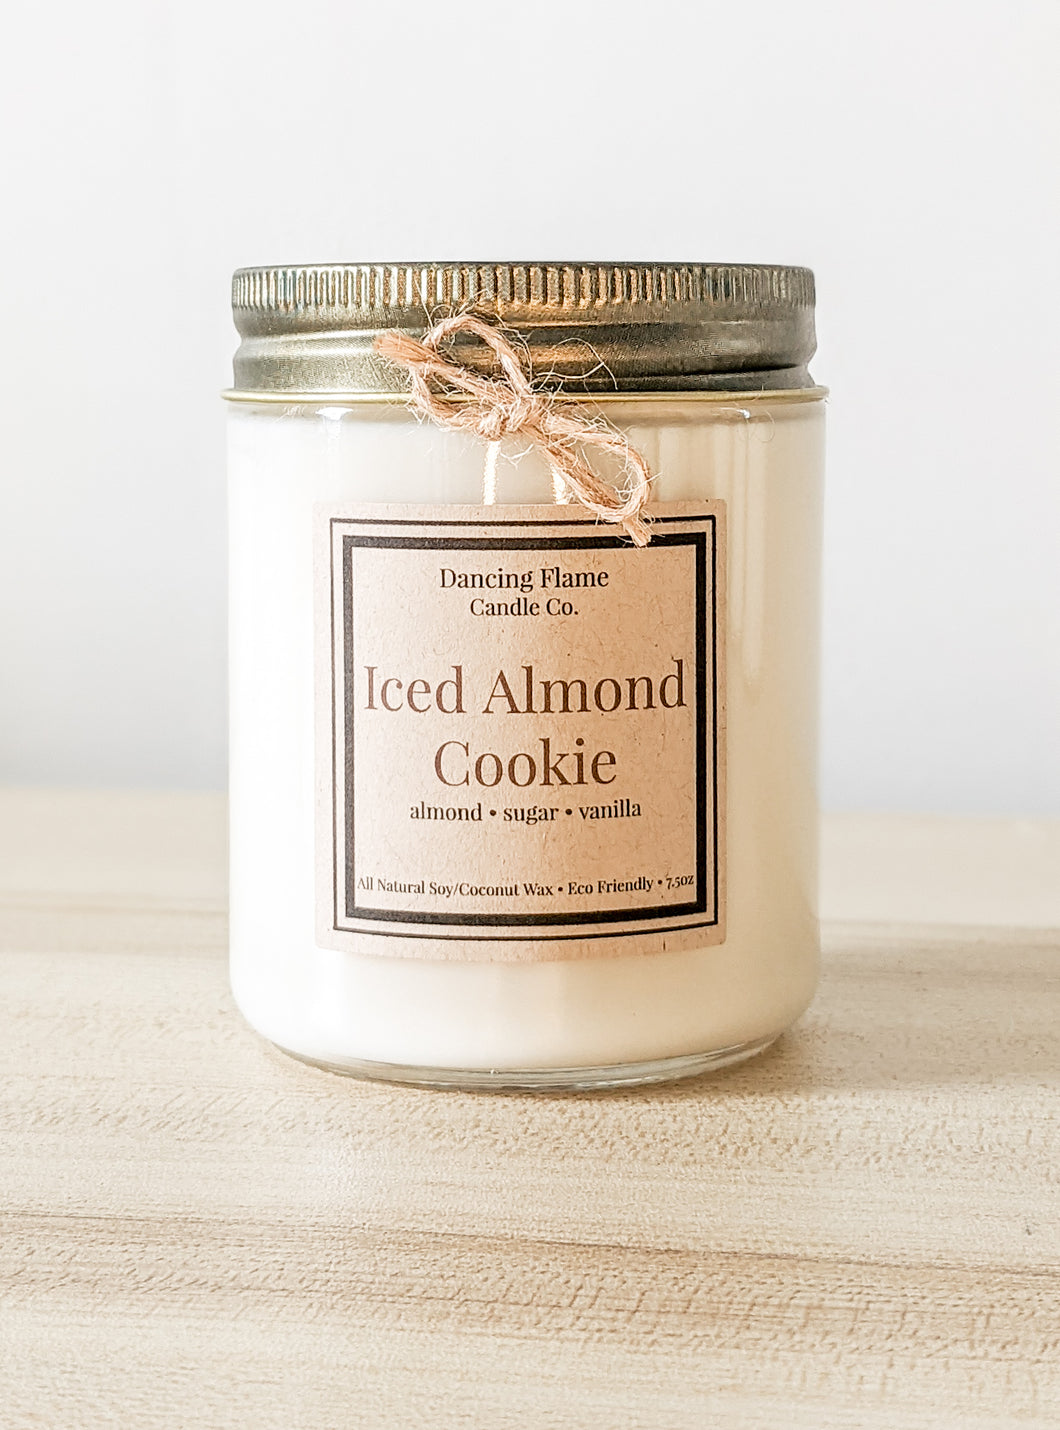 Iced Almond Cookie Soy & Coconut Wax Candle